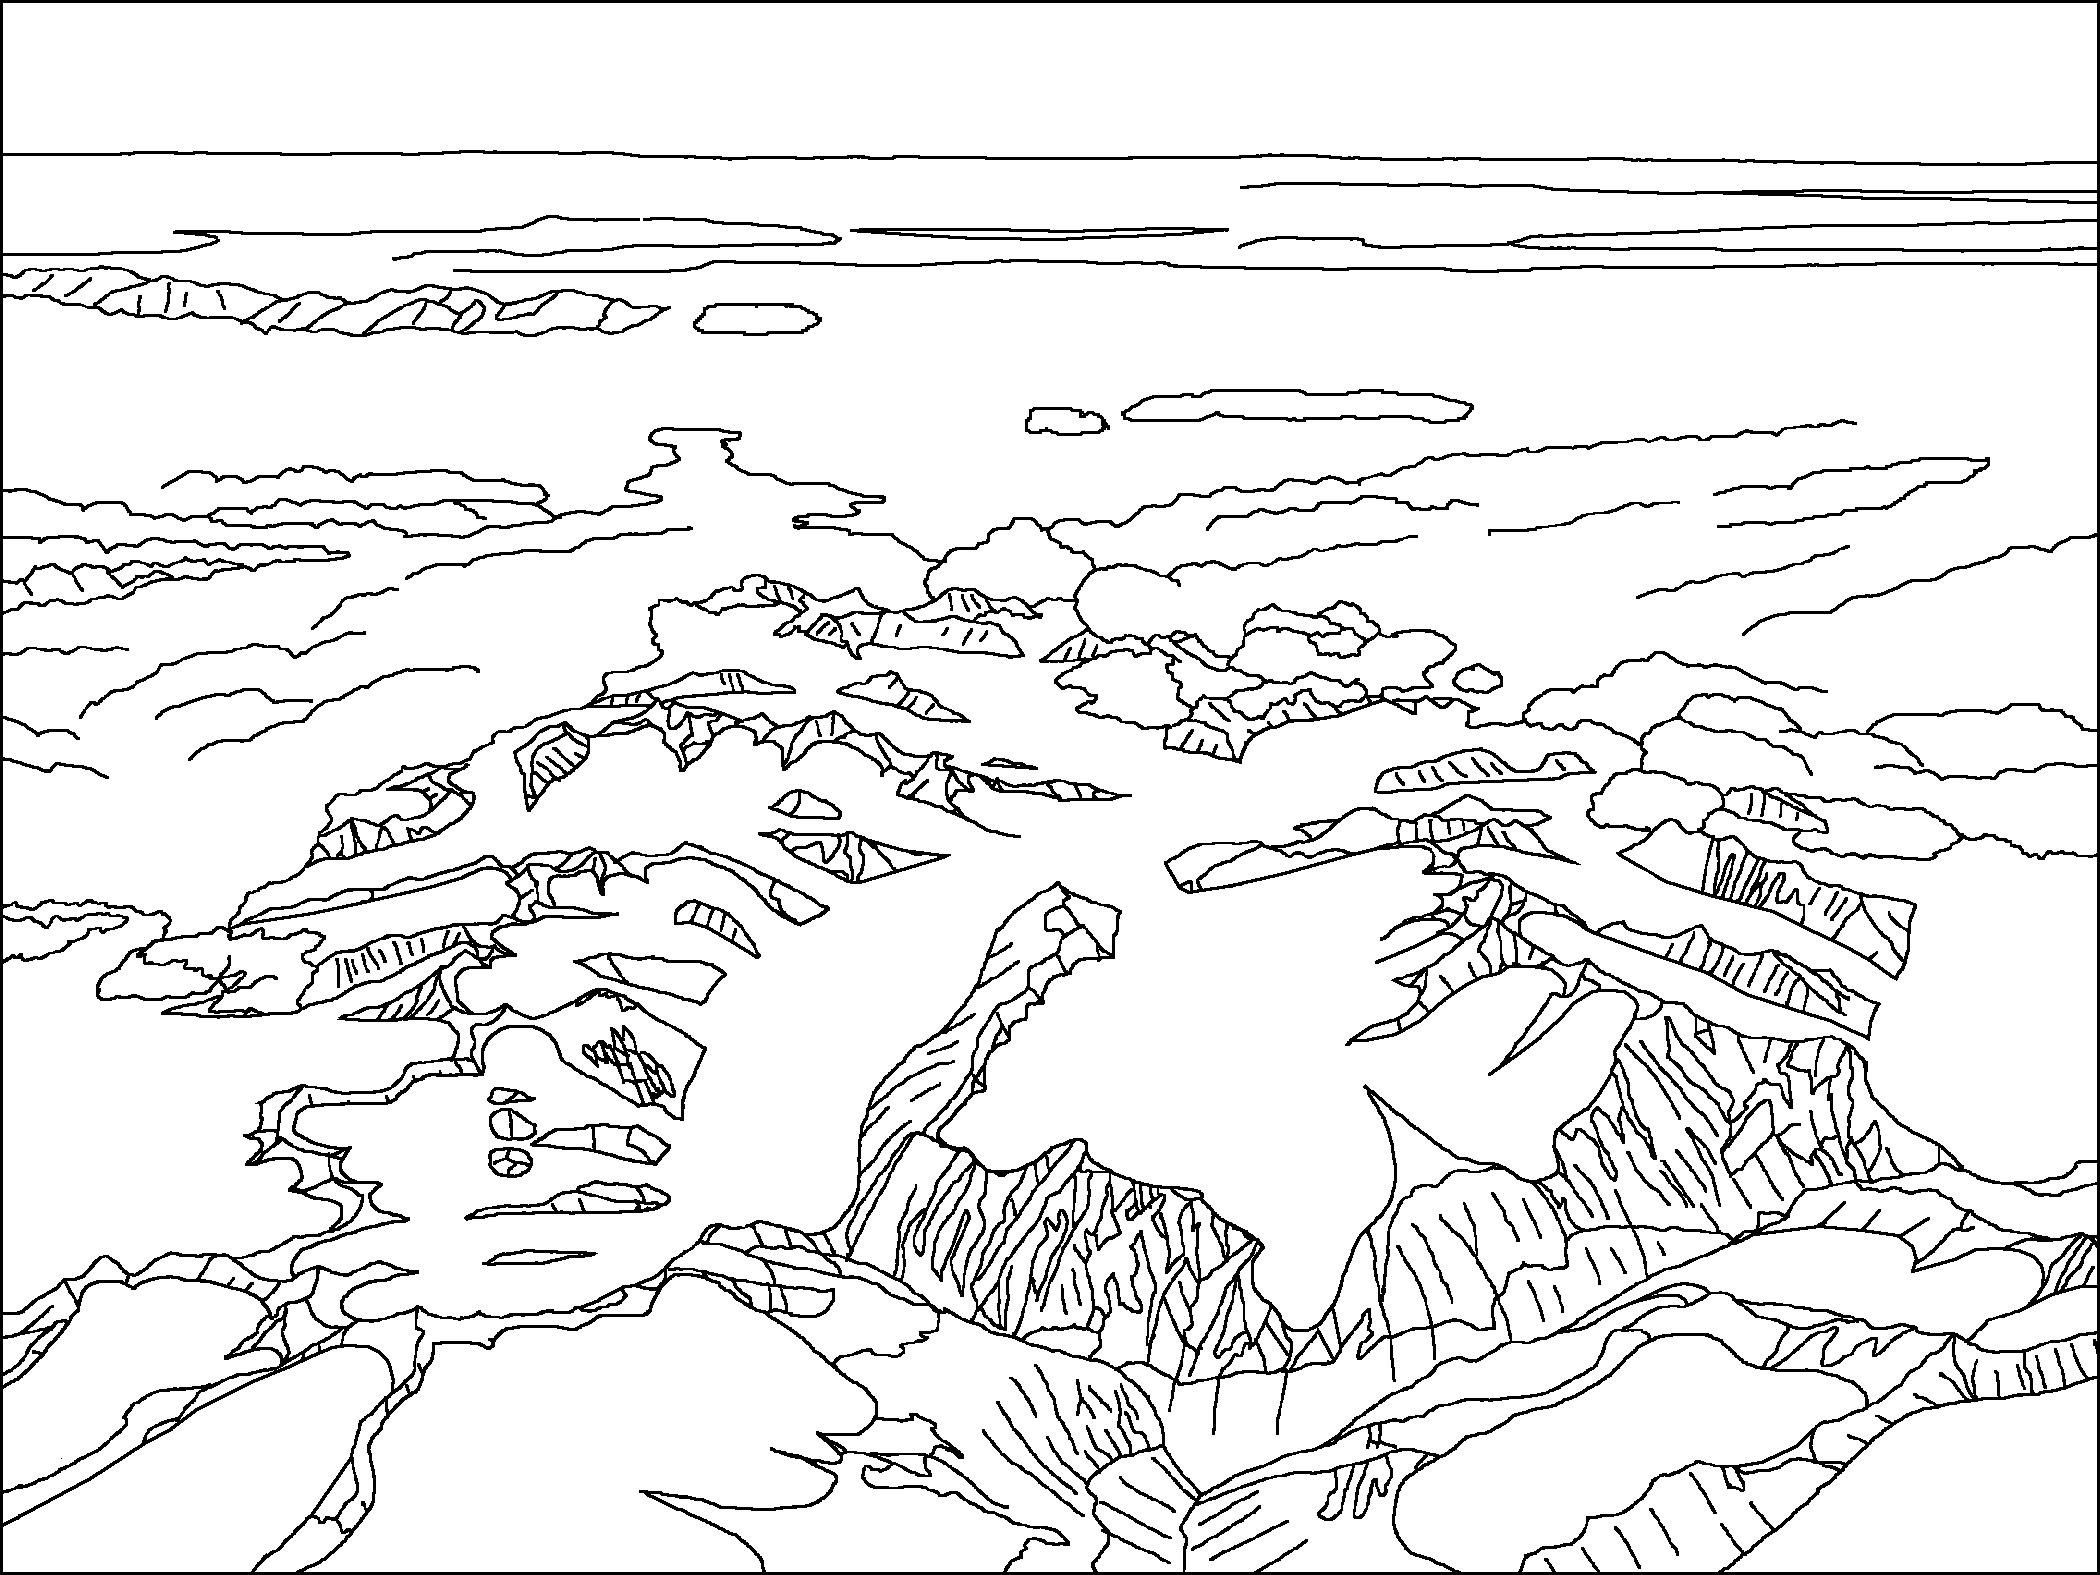 Sierra Nevada Mountains coloring #18, Download drawings